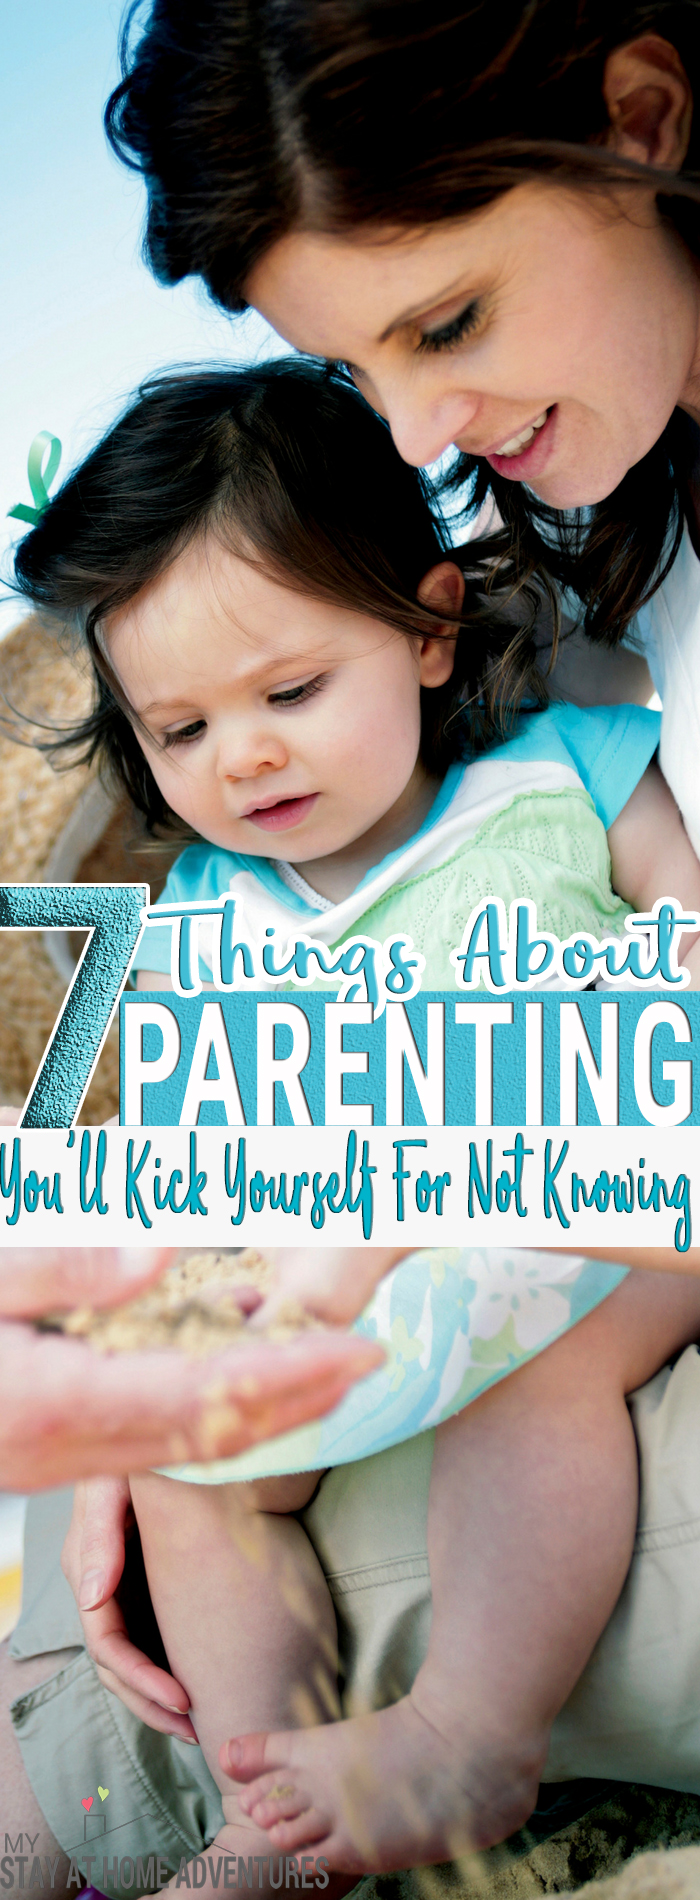 Hey parents there are 7 Things About Parenting You'll Kick Yourself For Not Knowing and as you will some of them are based on others expectations. Click and learn what these seven things are and start parenting the way you want!